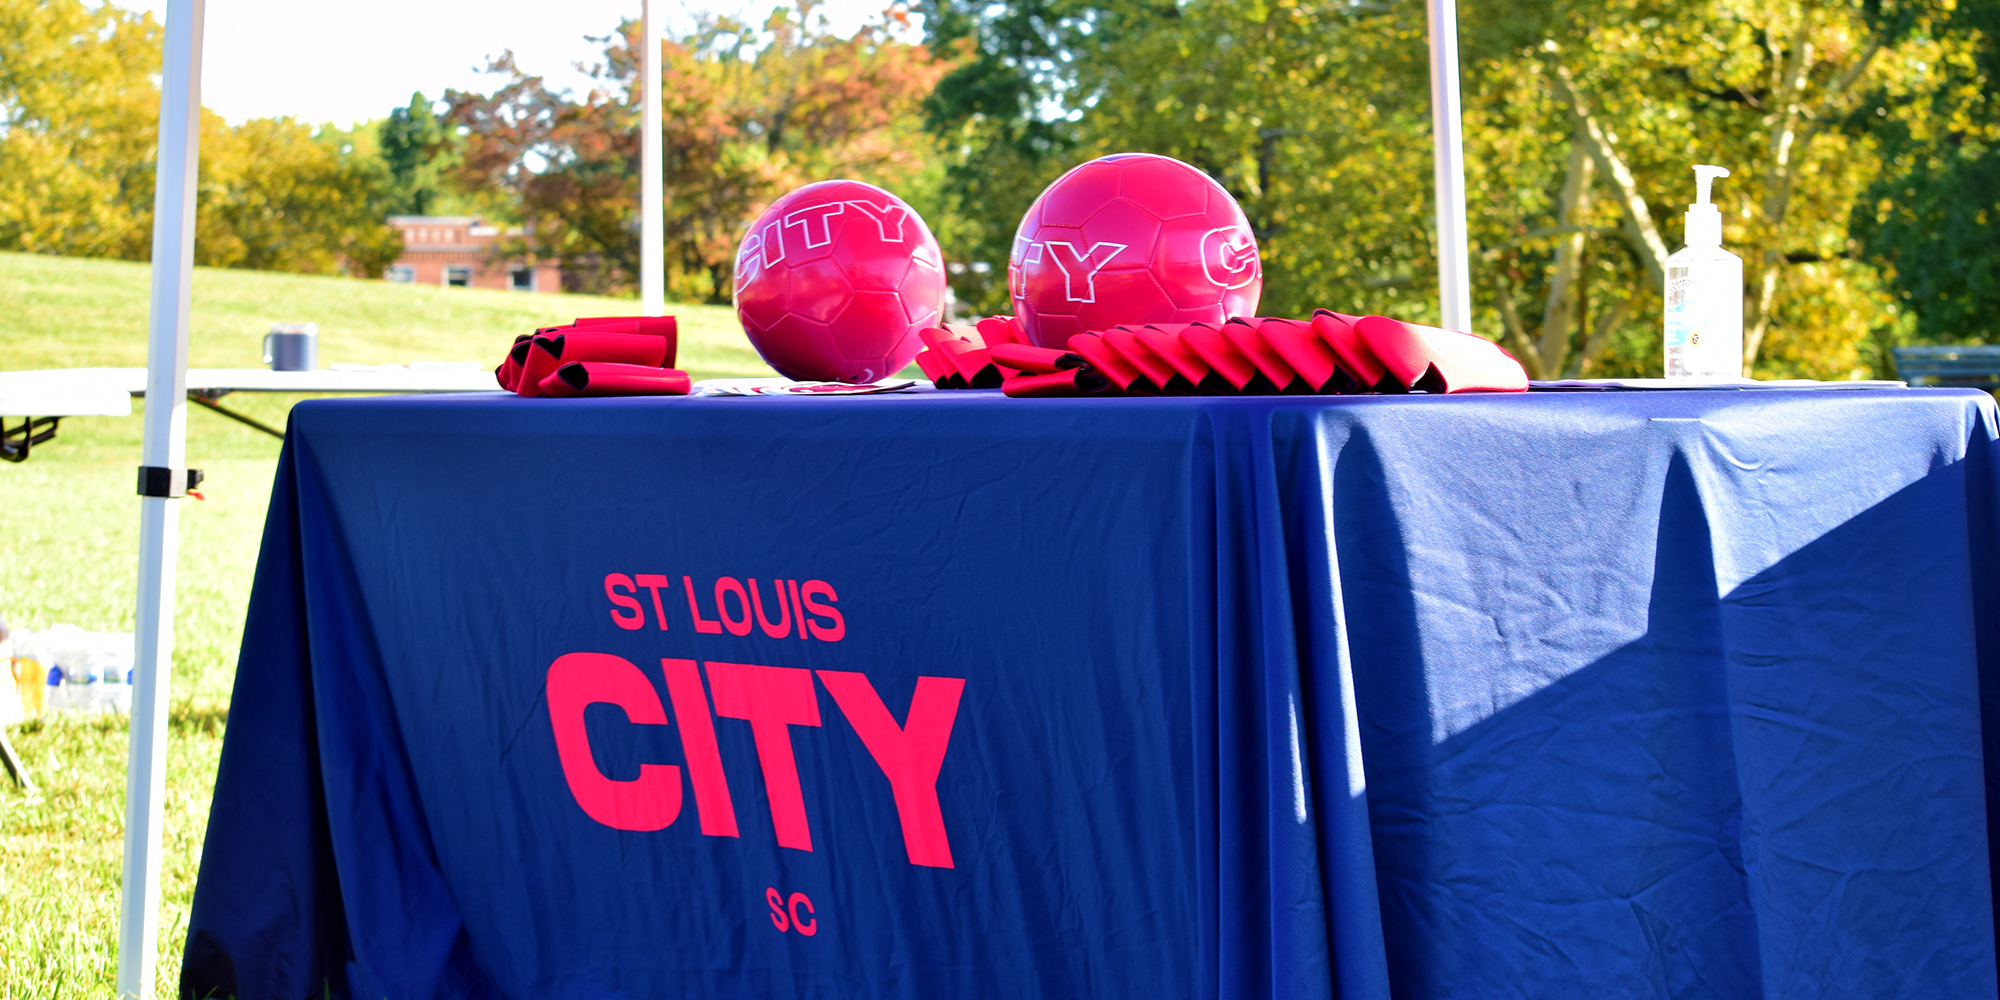 St. Louis CITY SC soccer balls and swag at the futsal court in Marquette Park in Dutchtown, St. Louis, MO.